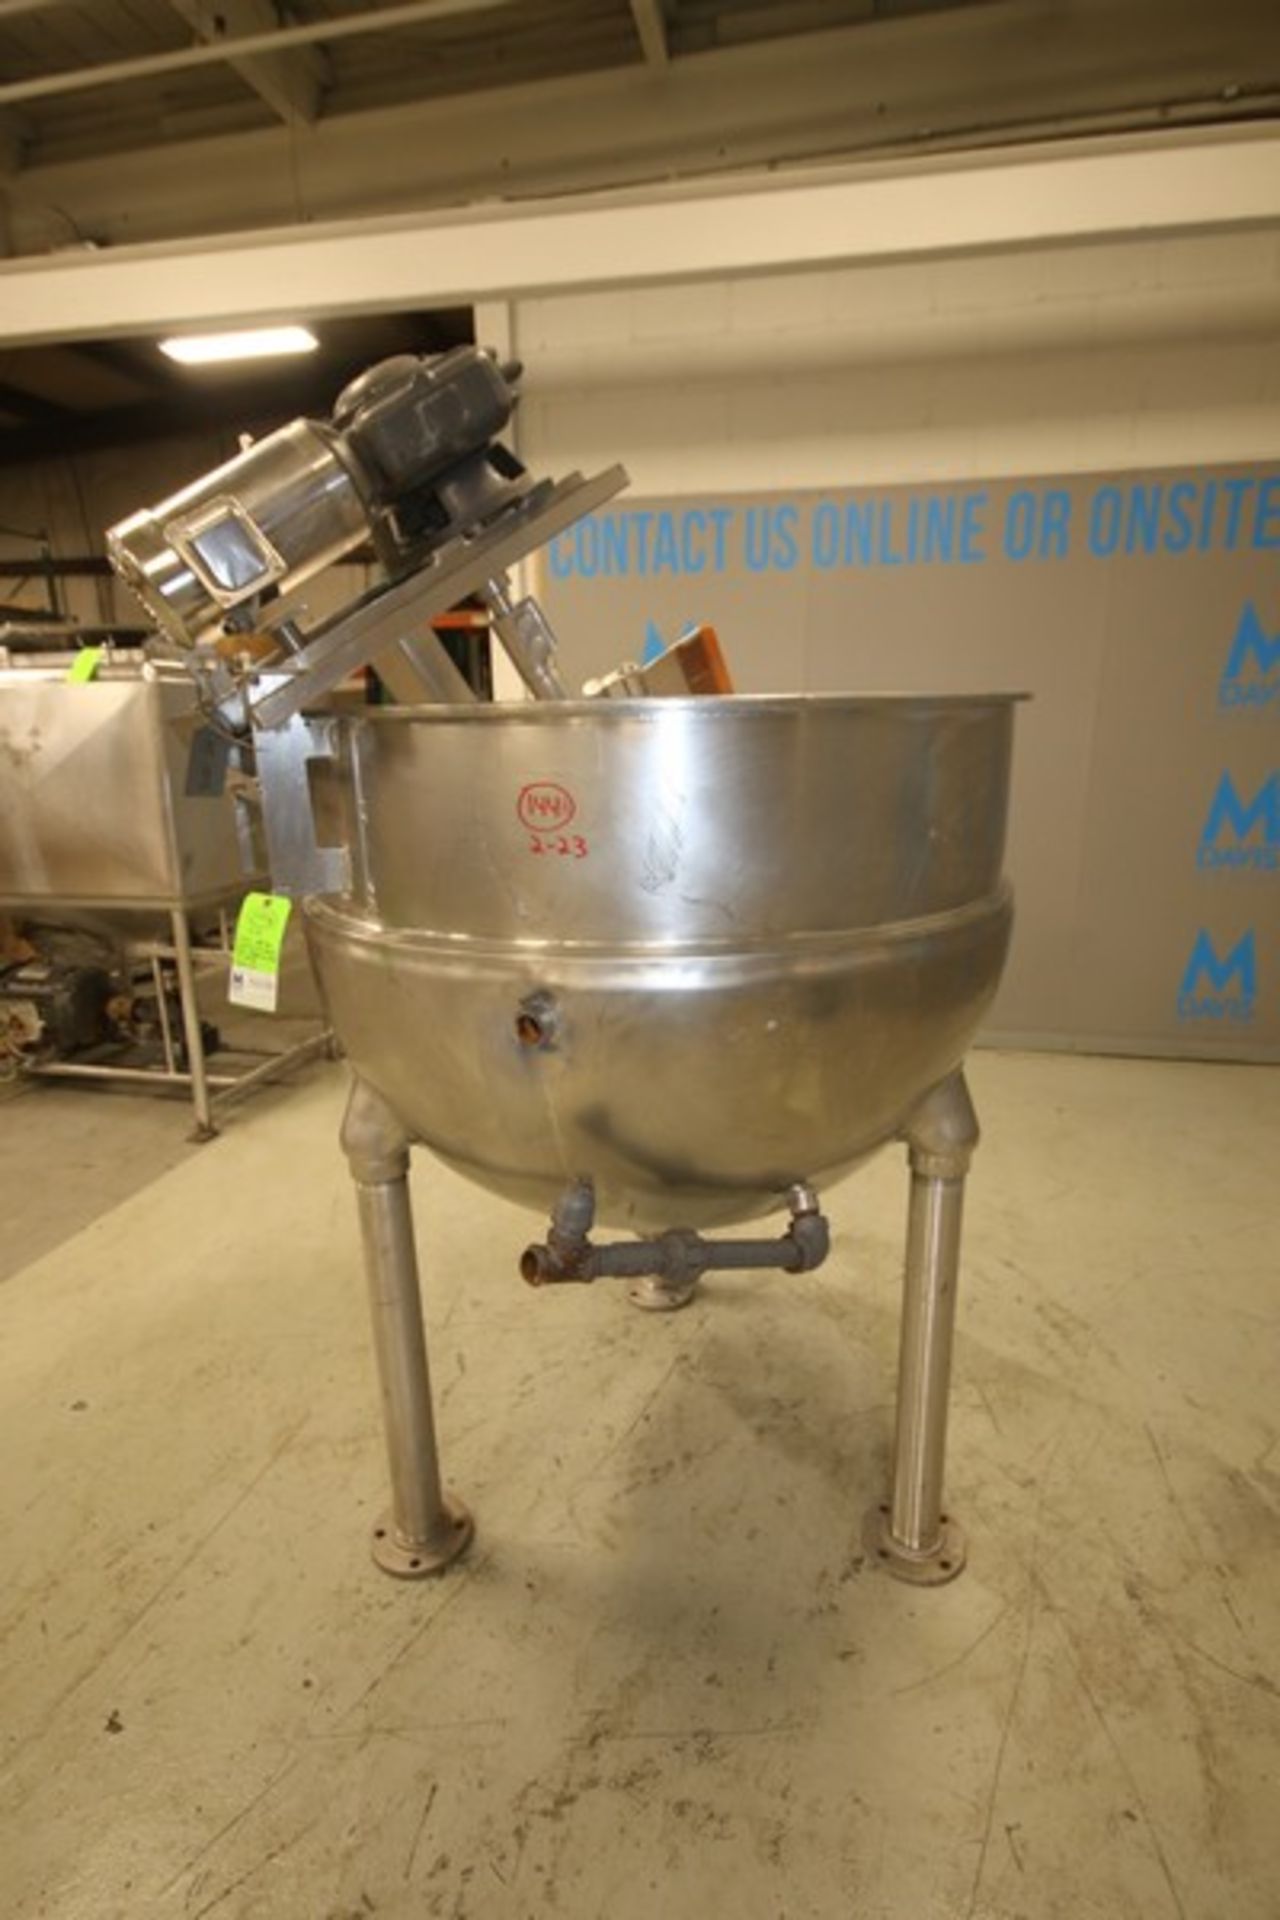 Groen 200 Gal. S/S Jacketed Kettle, Model INA / 2-200, SN 1978, BN 88764, with Scrape Surface Off- - Image 4 of 7